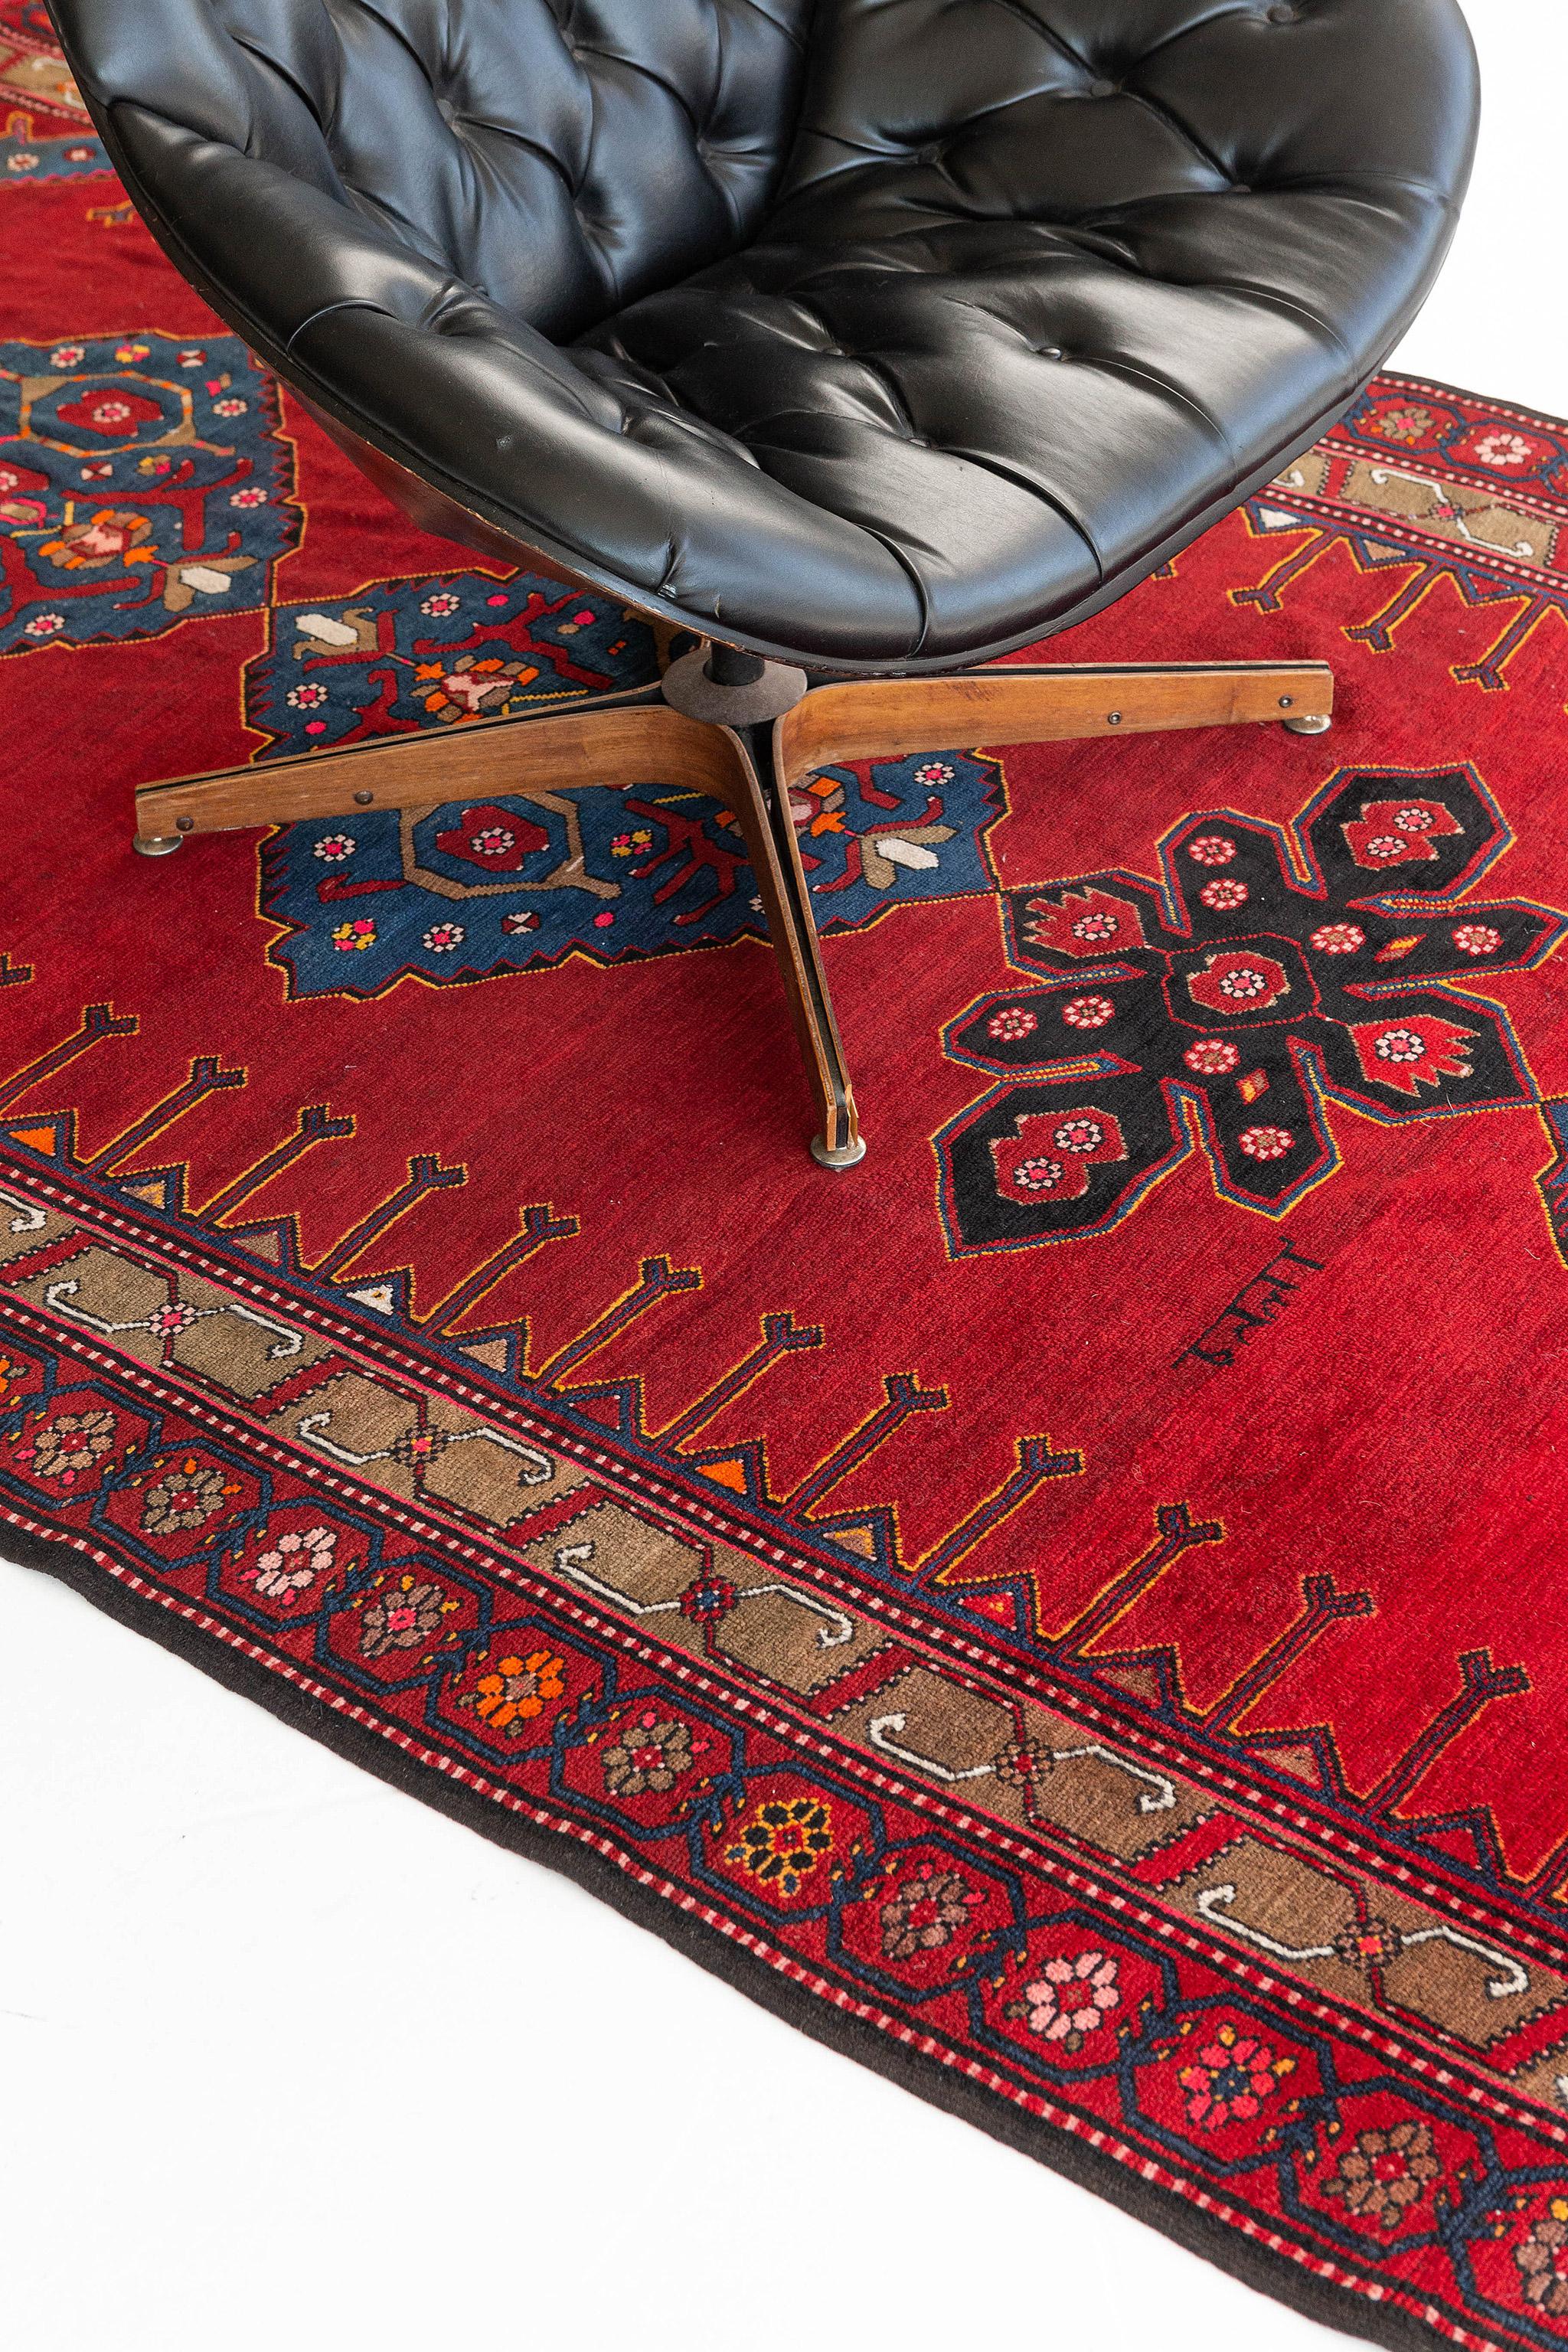 A luxurious Karabagh runner features aligned midnight blue medallions and a modest spandrel in a vibrant red field. The florets that surround the design make it more wonderful and eccentric. A masterpiece that would be lovely to be added to your